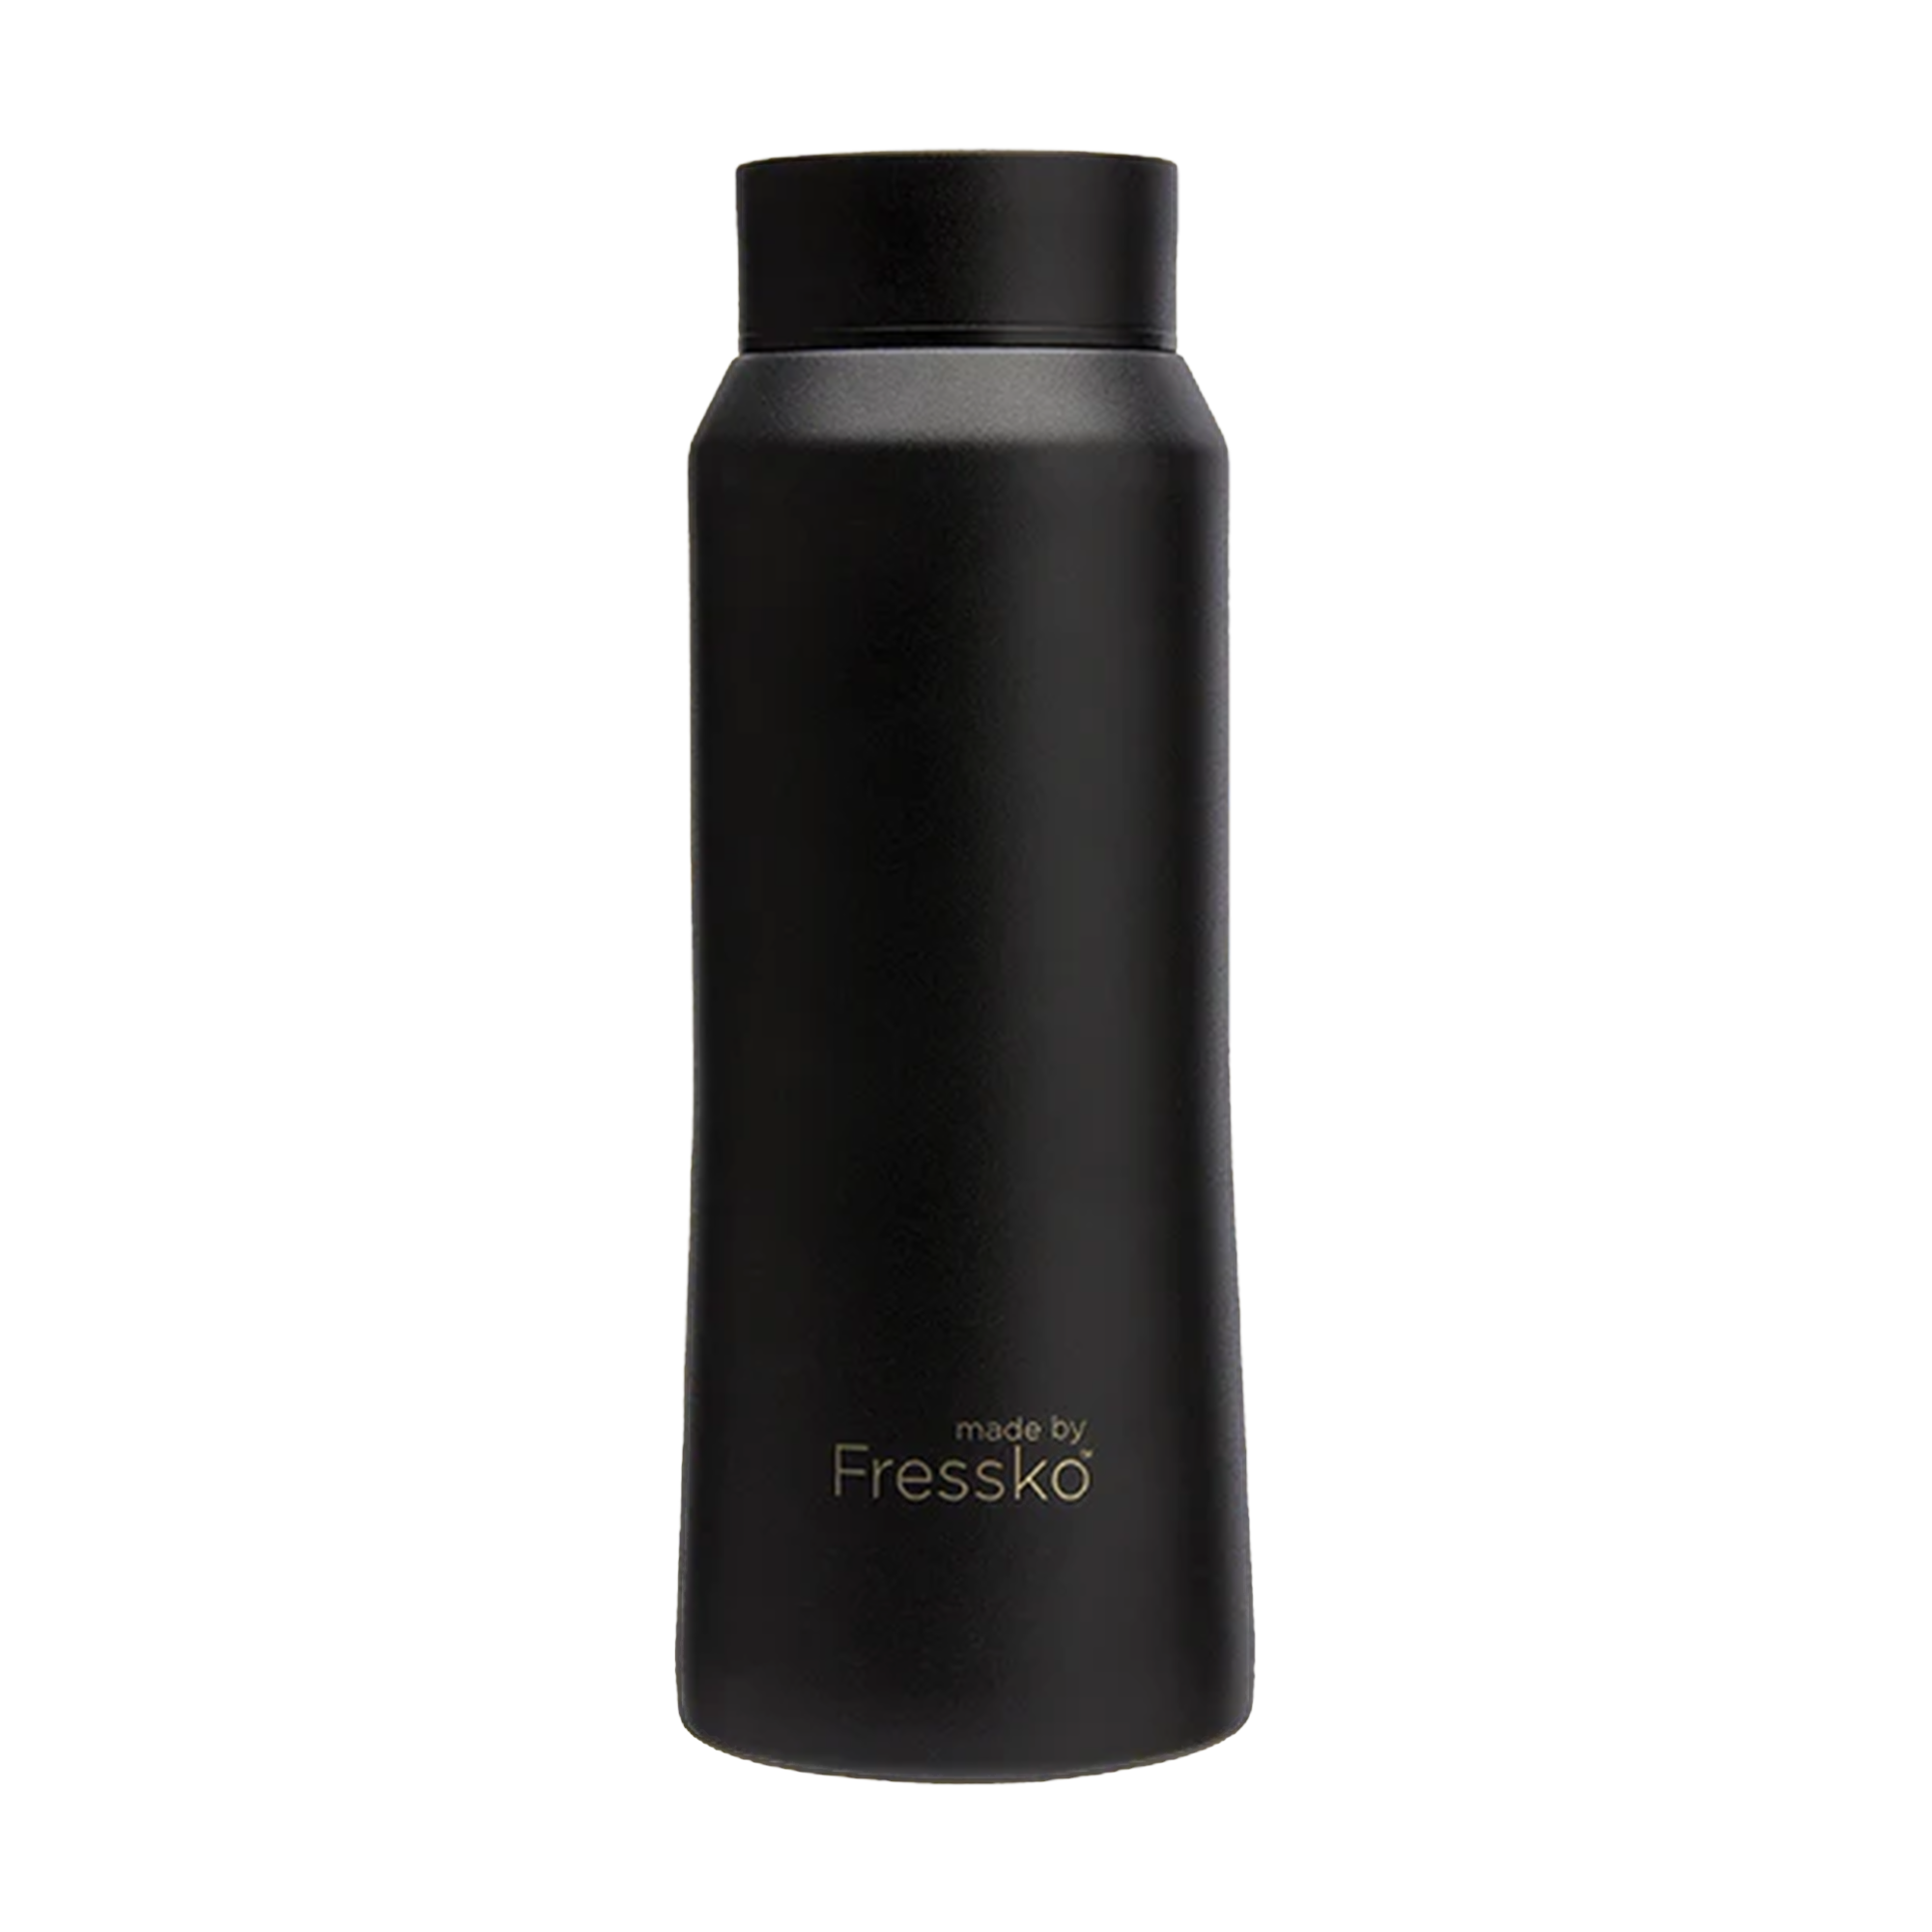 CORE Insulated Stainless Steel 1L - Coal